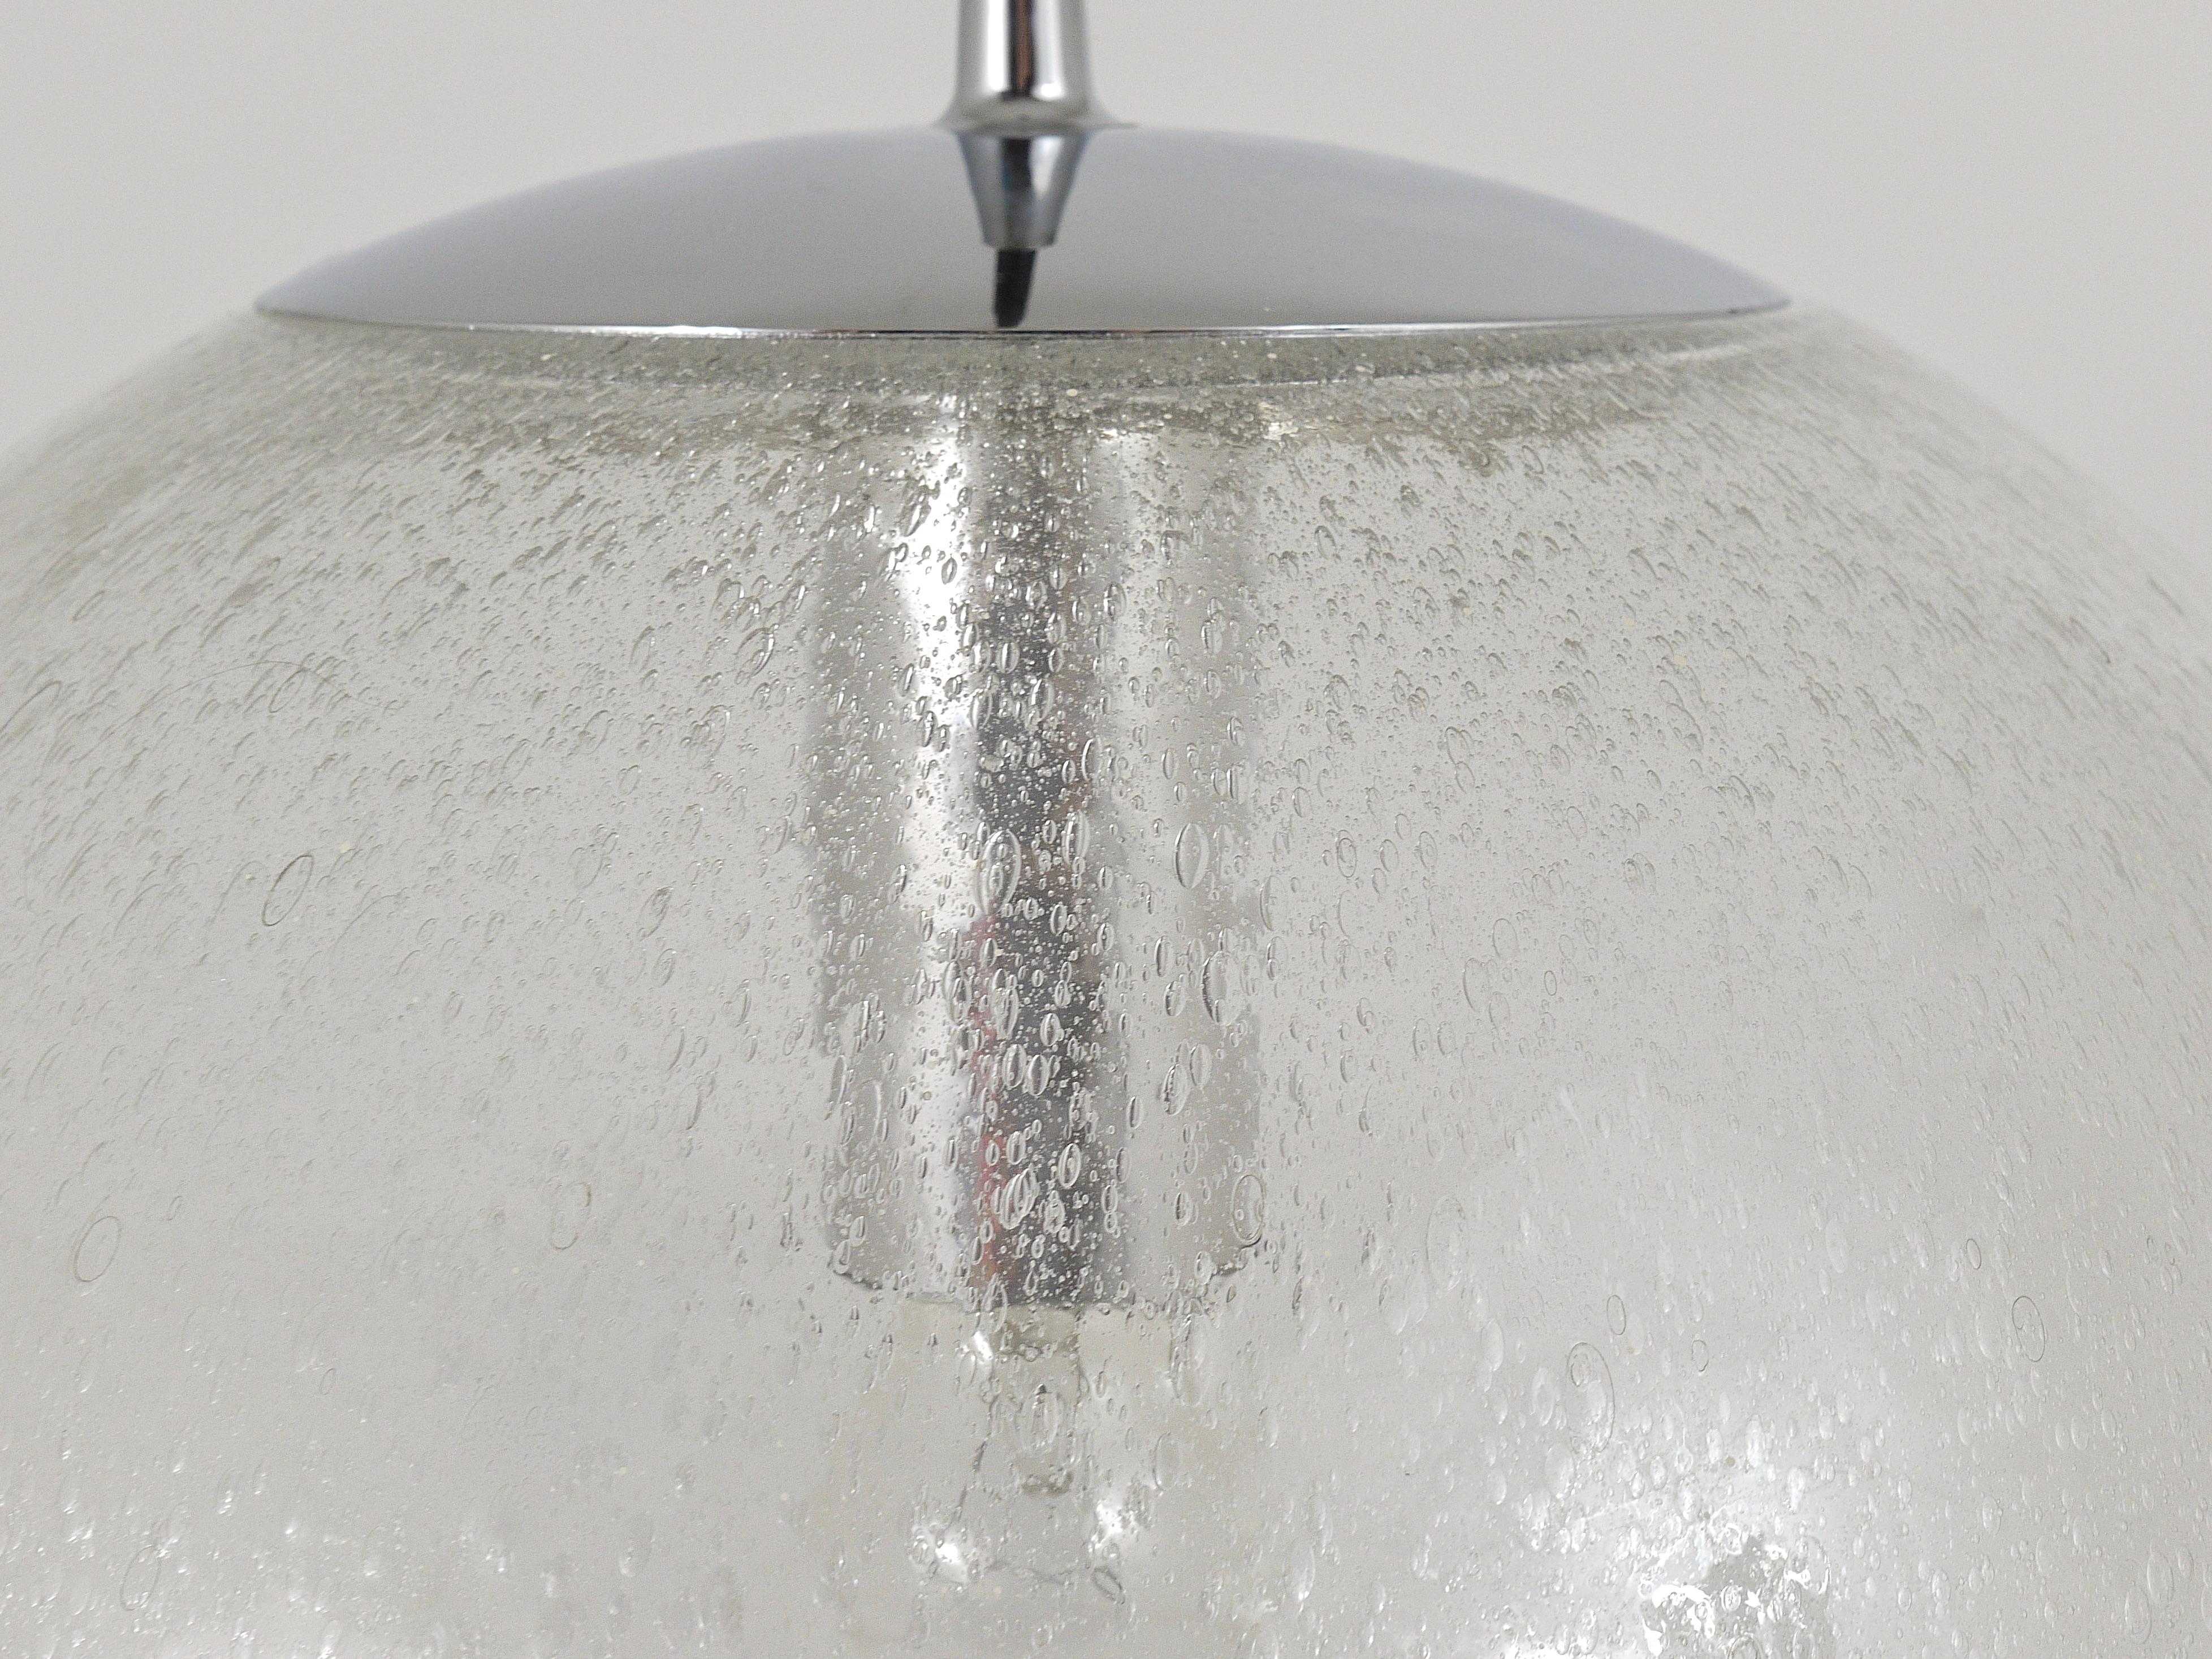 Large Peil & Putzler Bubble Glass and Chrome Globe Pendant Lamp, Germany, 1970s For Sale 1